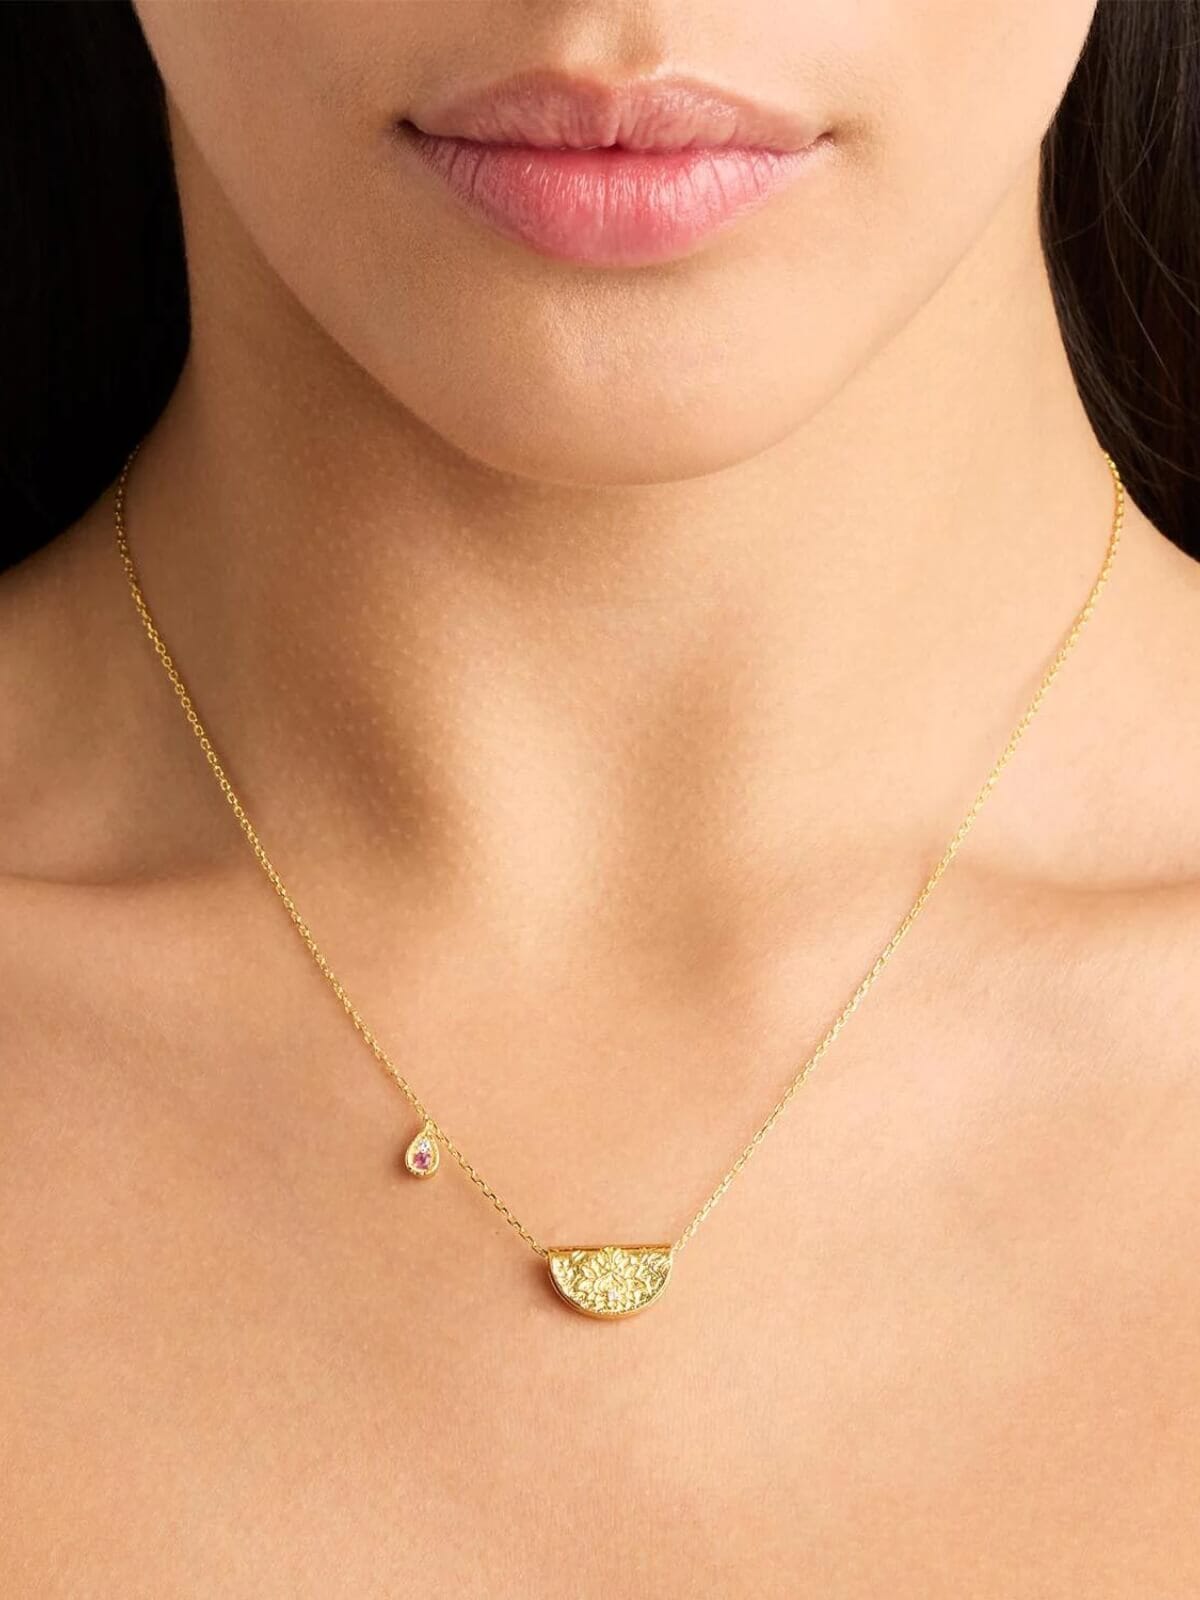 By Charlotte | Lotus Birthstone Necklace - October | Pink Tourmaline - Gold | Perlu